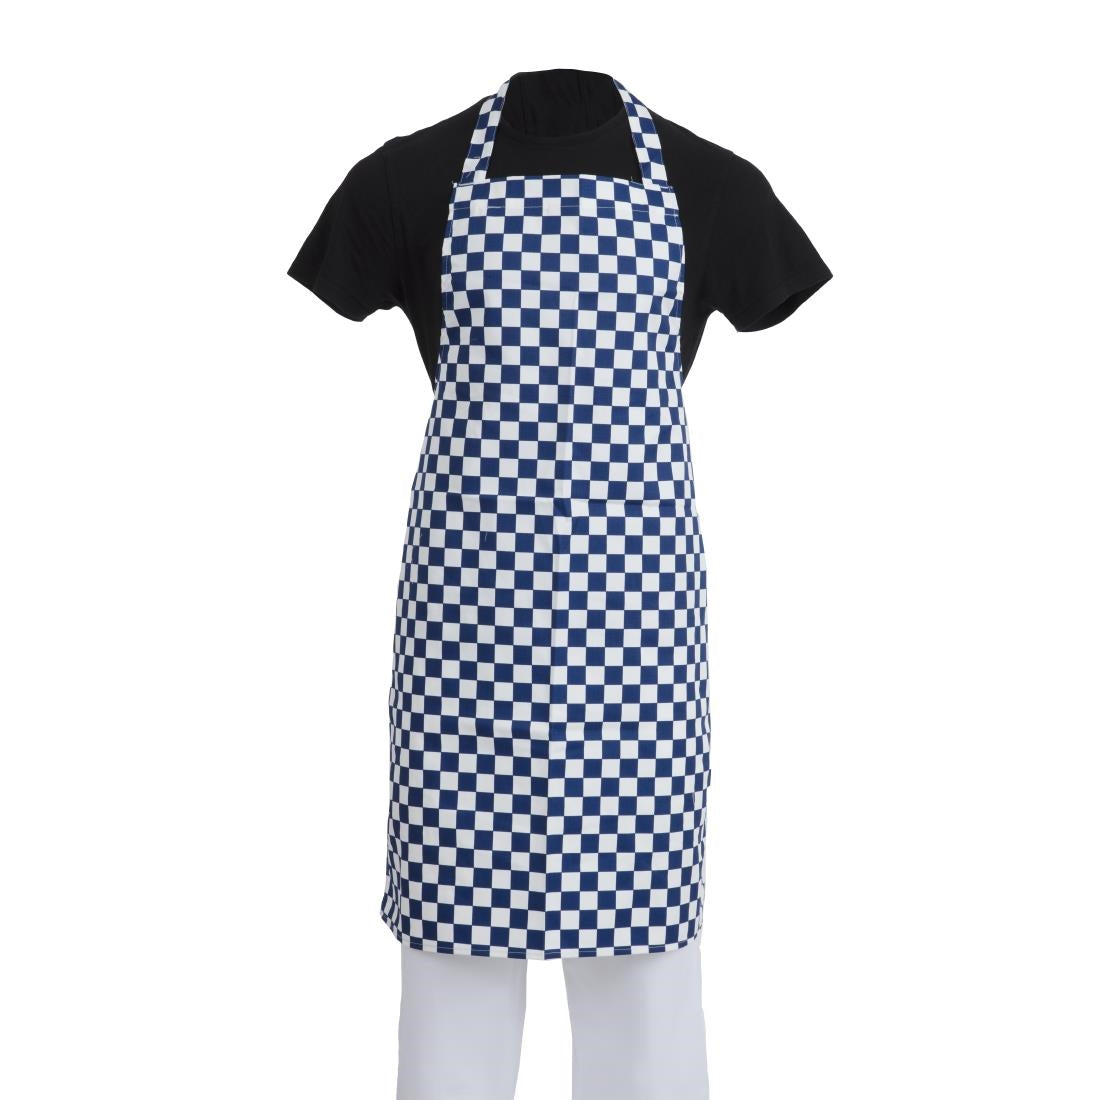 A554 Whites Bib Apron Blue And White Check JD Catering Equipment Solutions Ltd